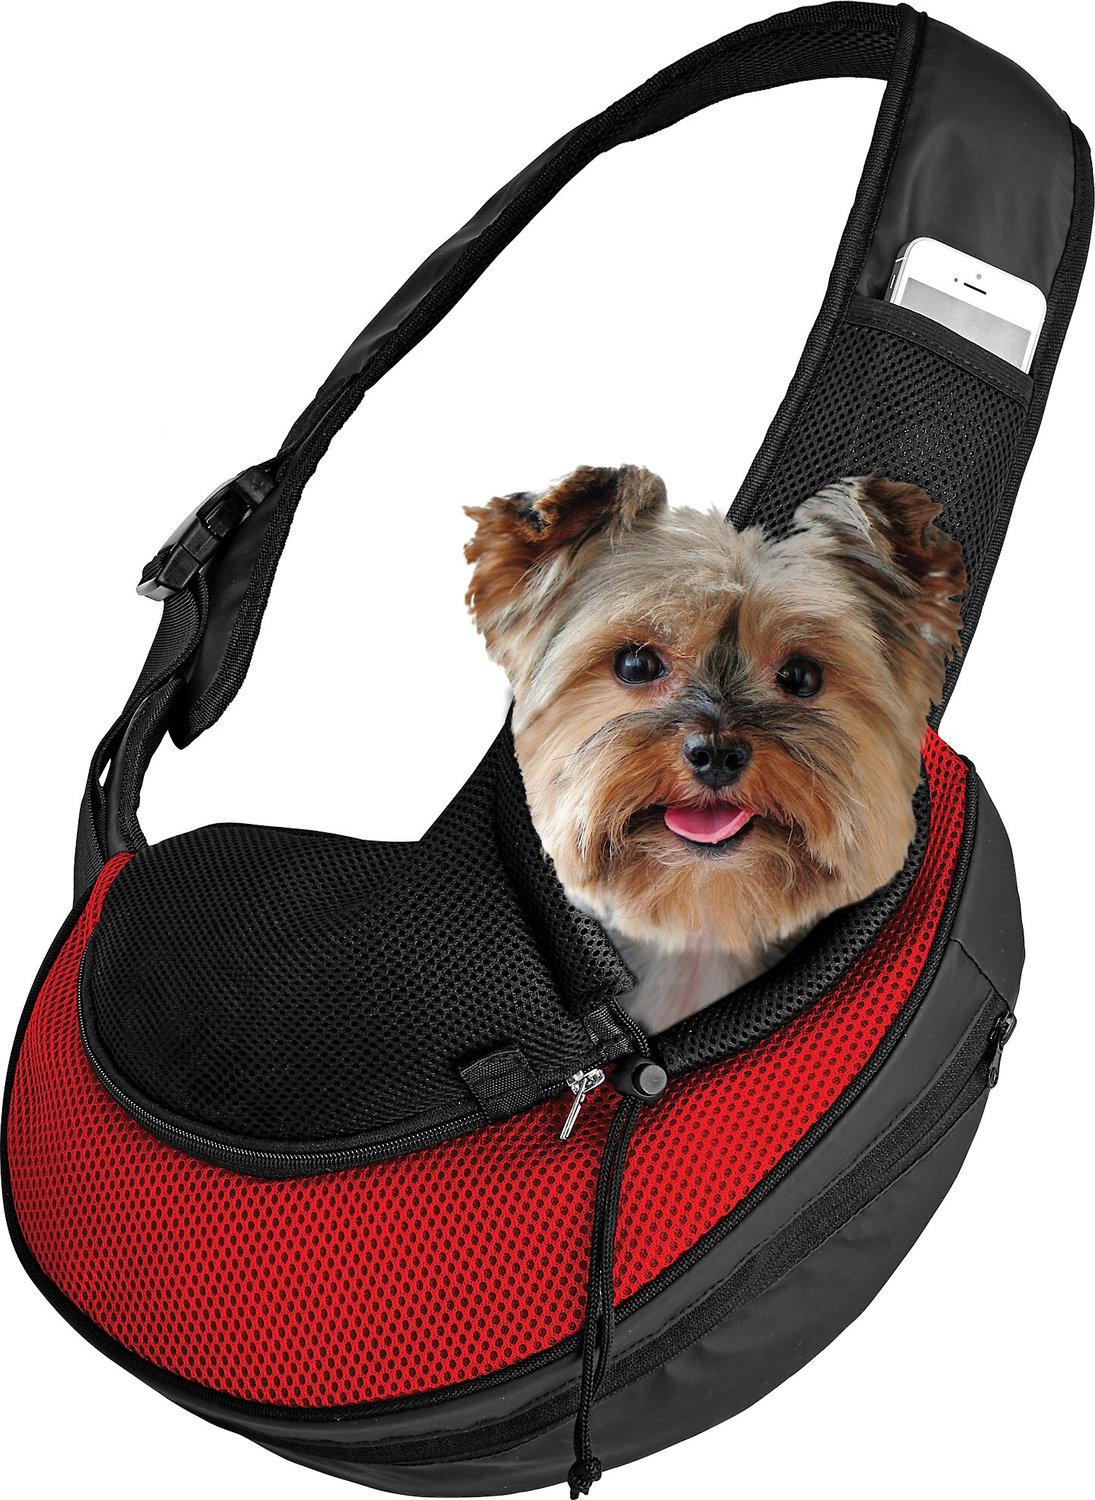  PetAmi Dog Sling Carrier for Small Dogs, Puppy